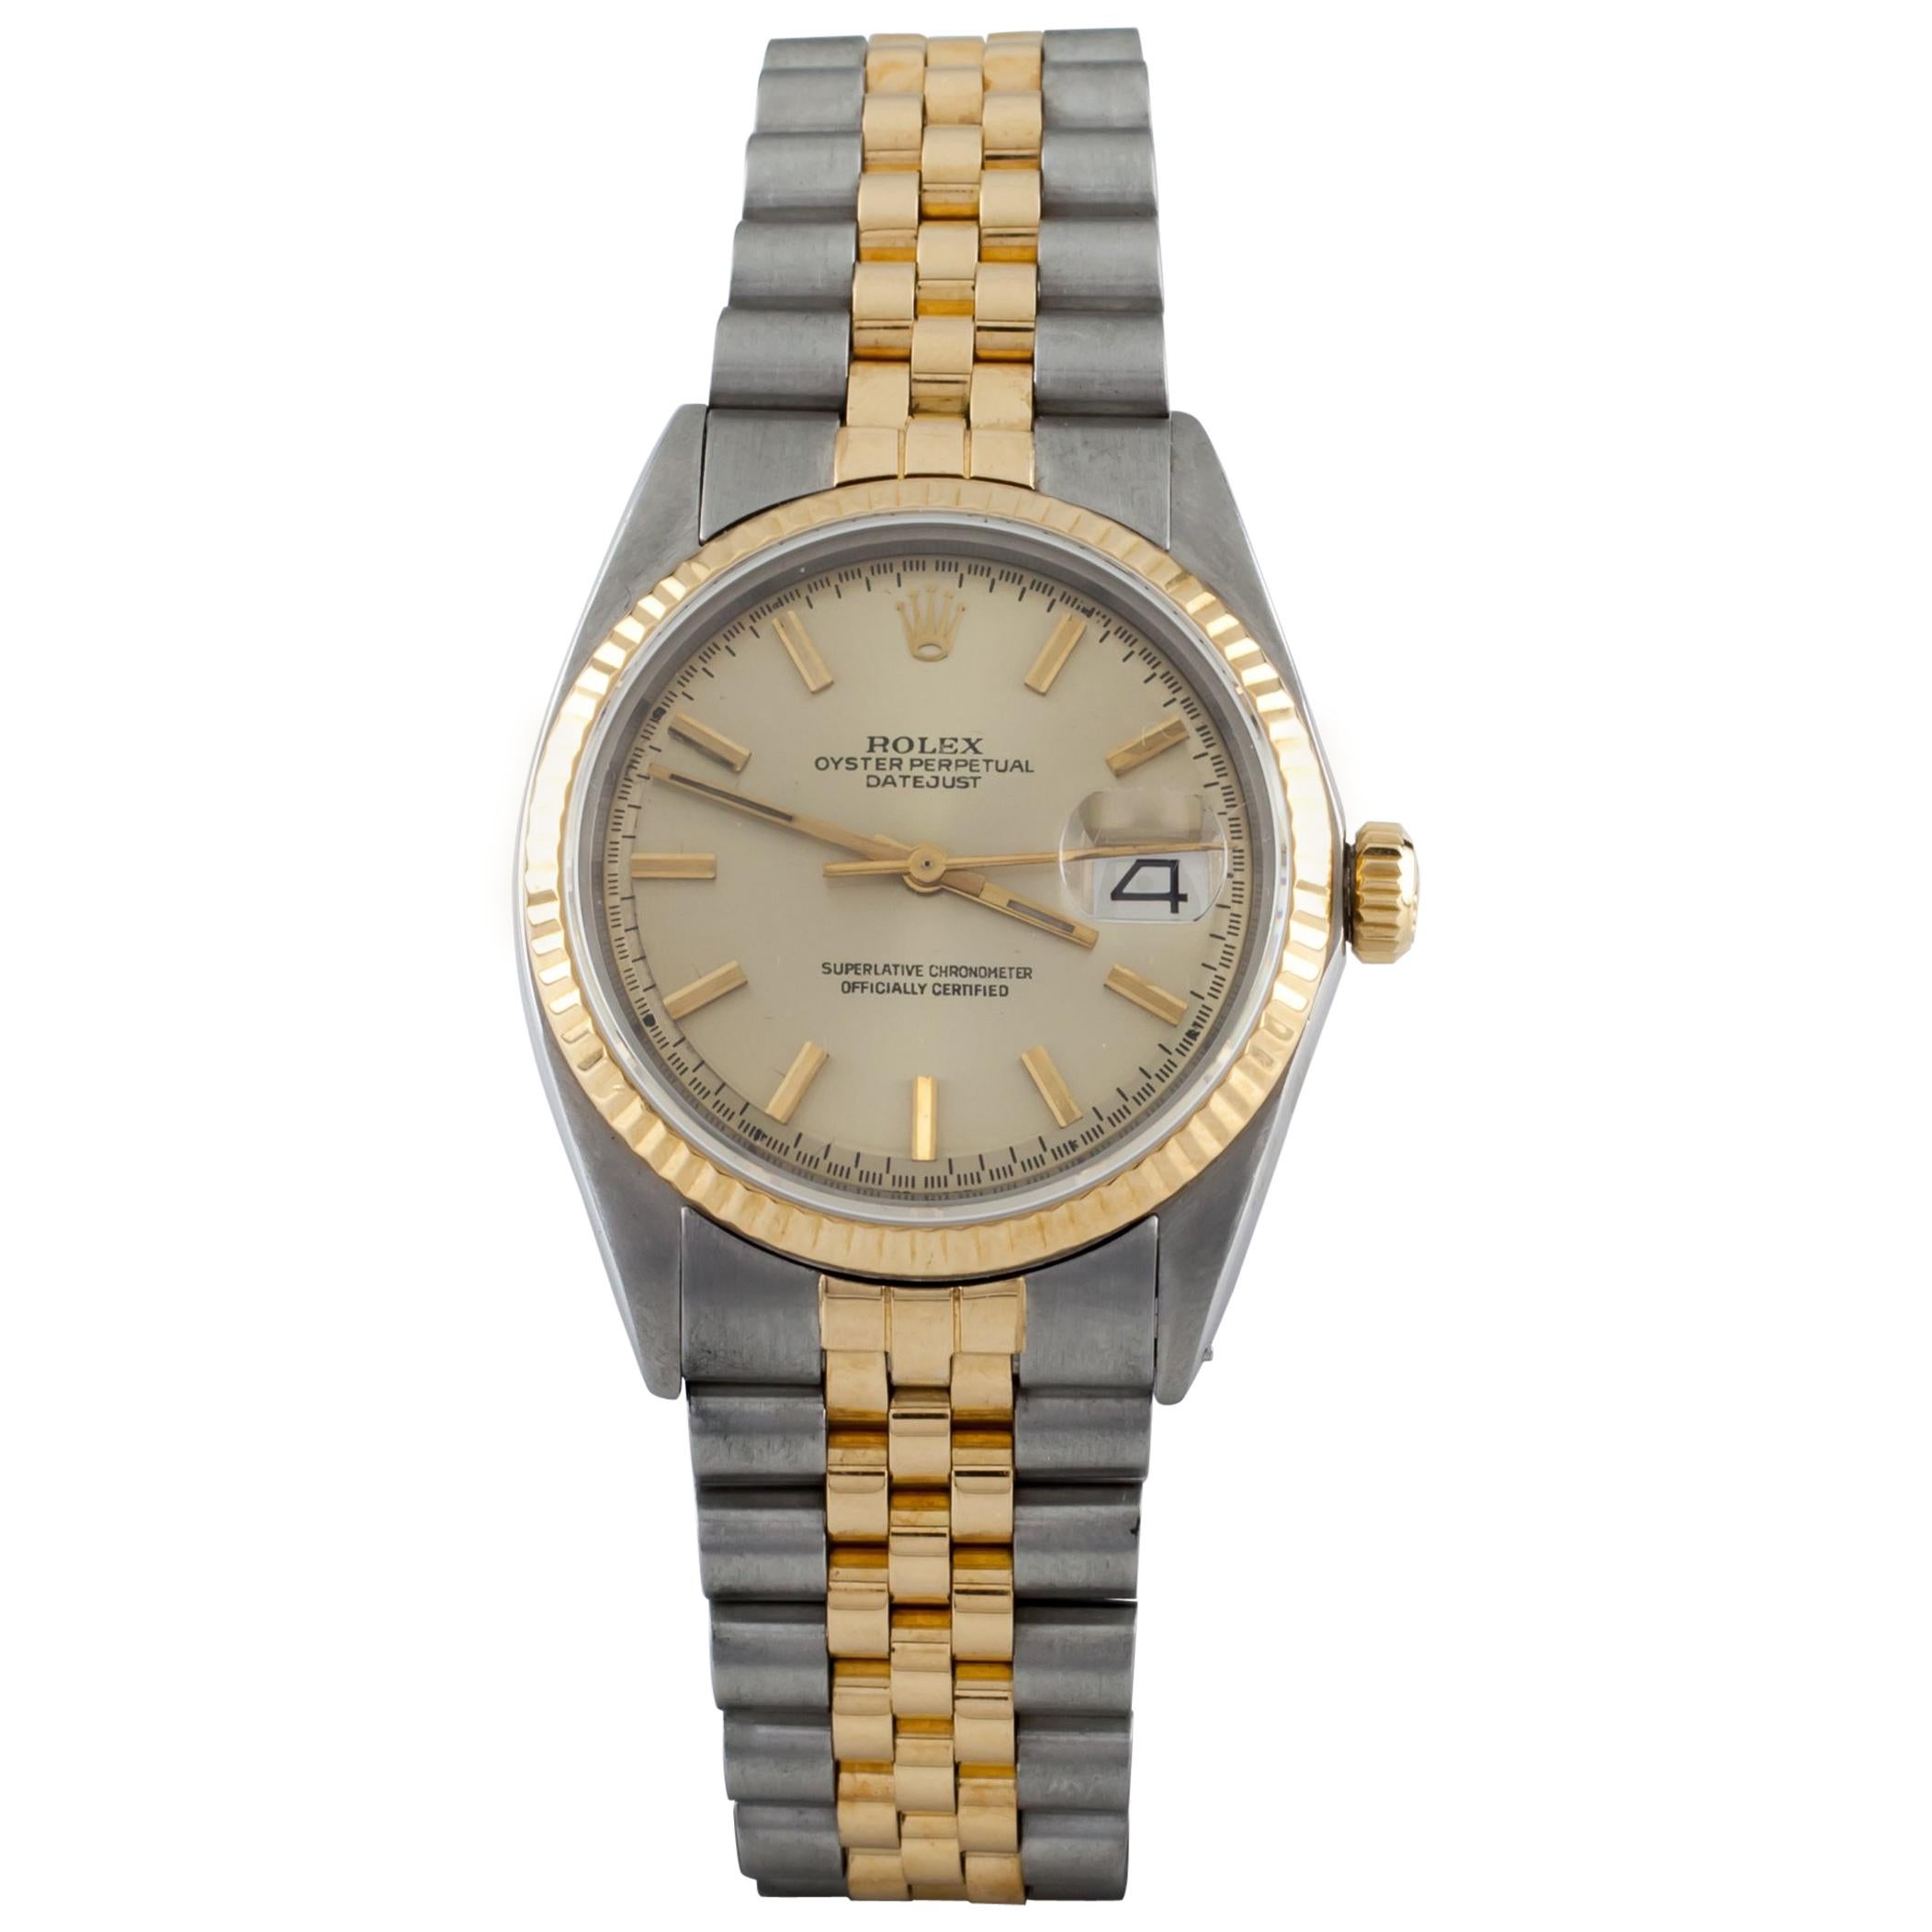 Rolex OP Datejust #1603 Two Tone 18k Gold/SS Men's Automatic Watch w/ Box